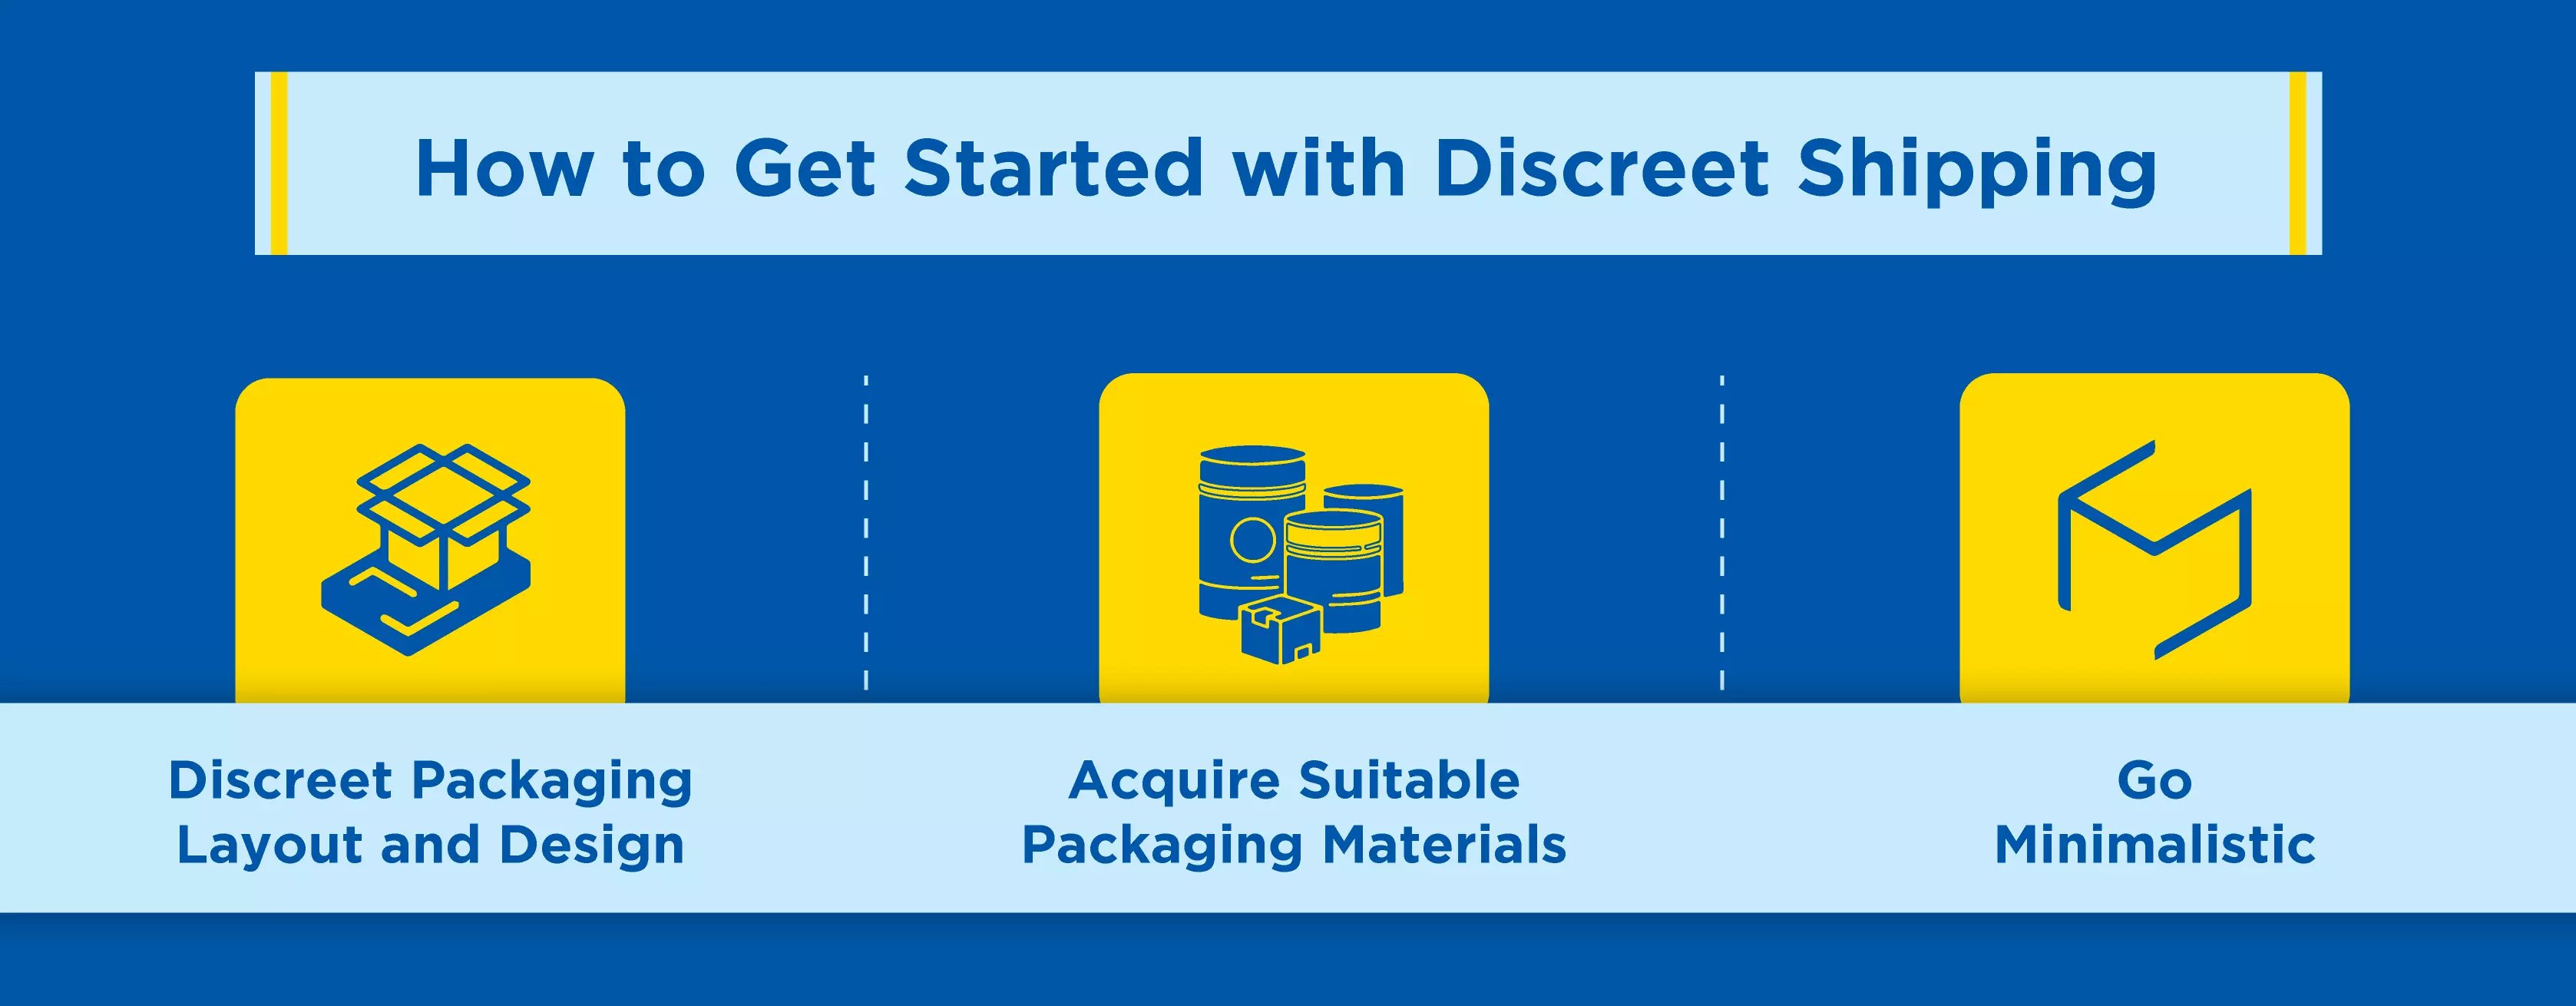 How to Get Started with Discreet Shipping